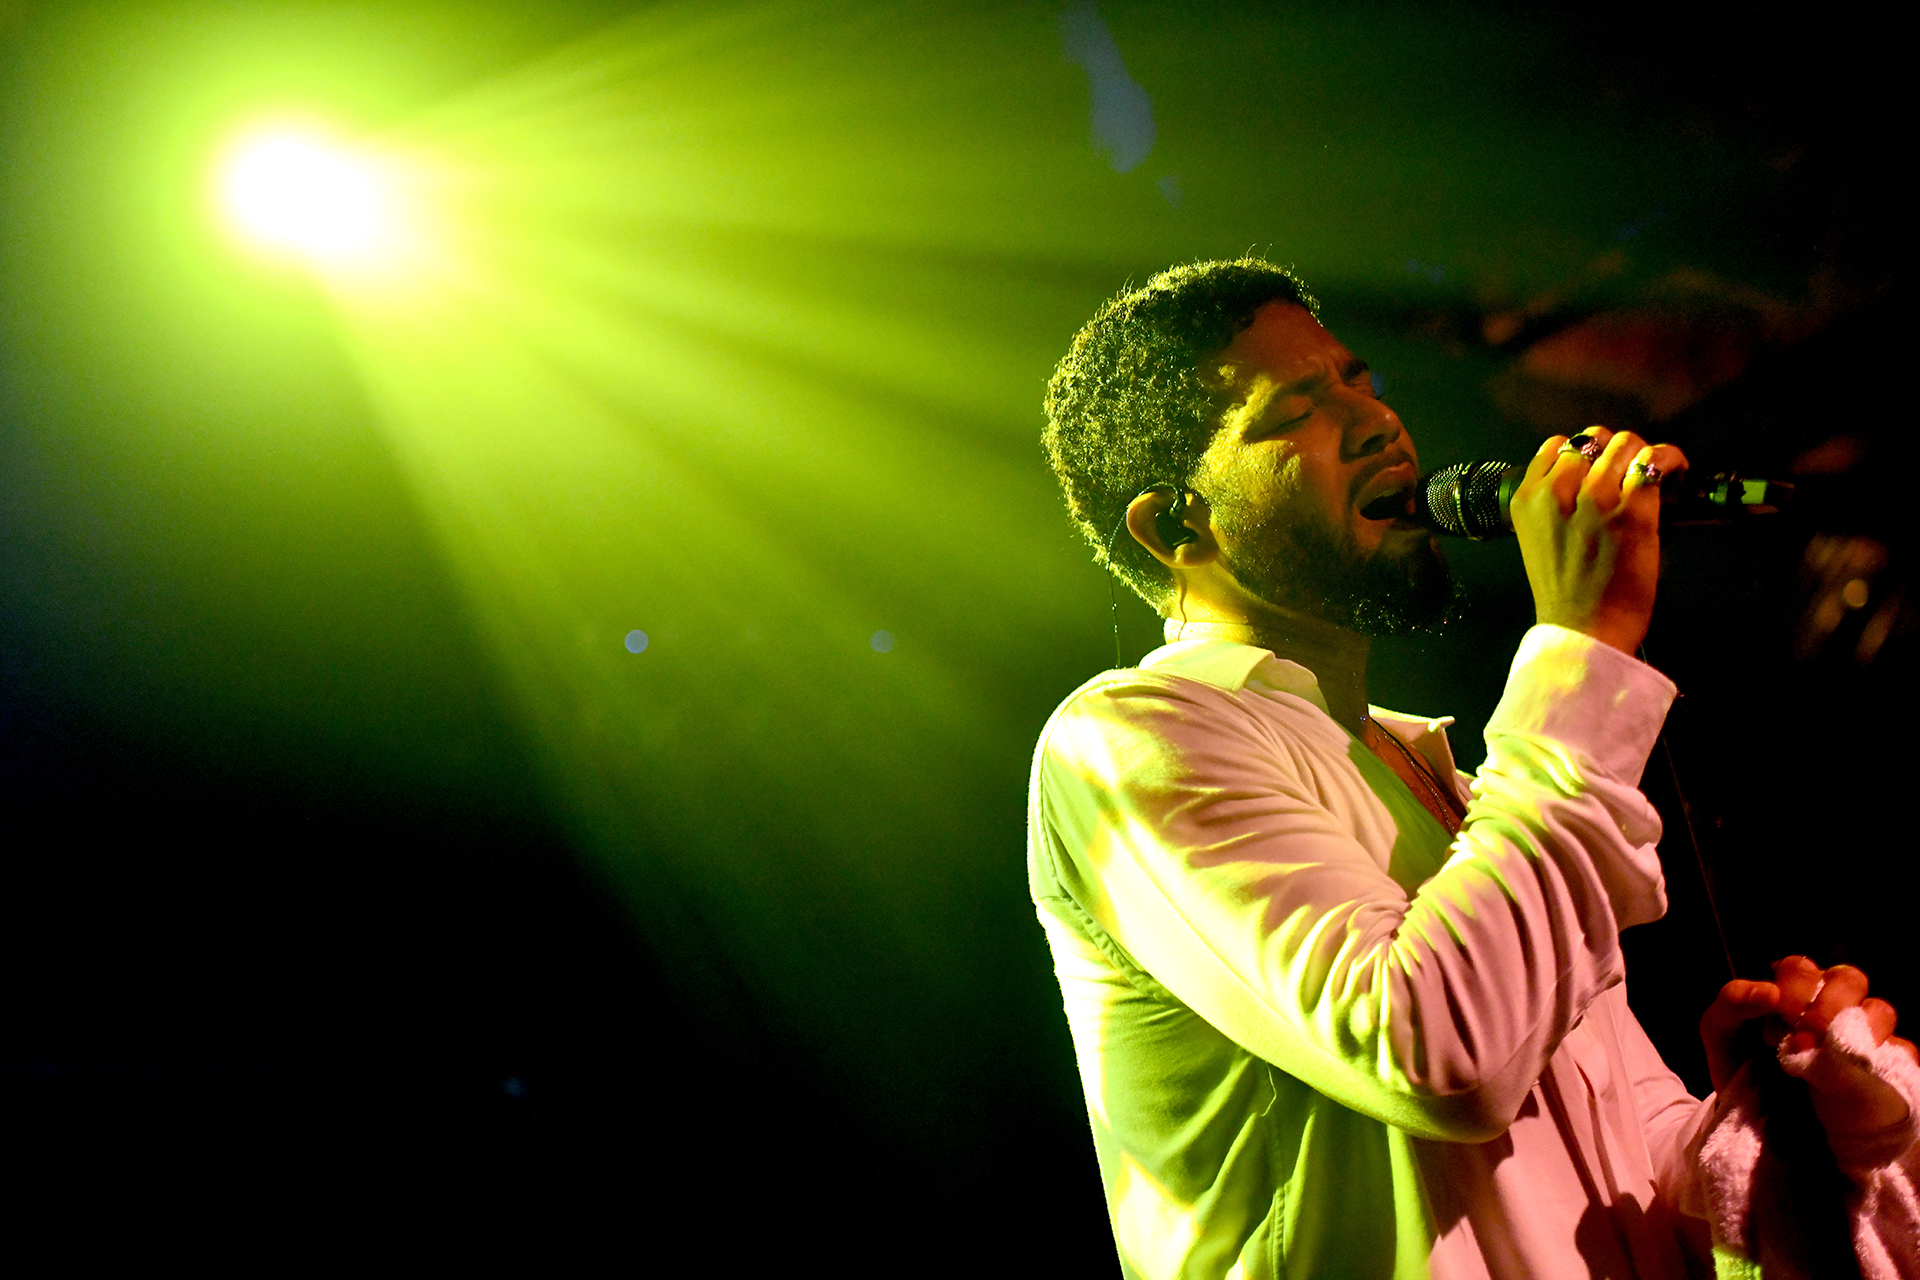 Jussie Smollett performs onstage at Troubadour on February 02, 2019